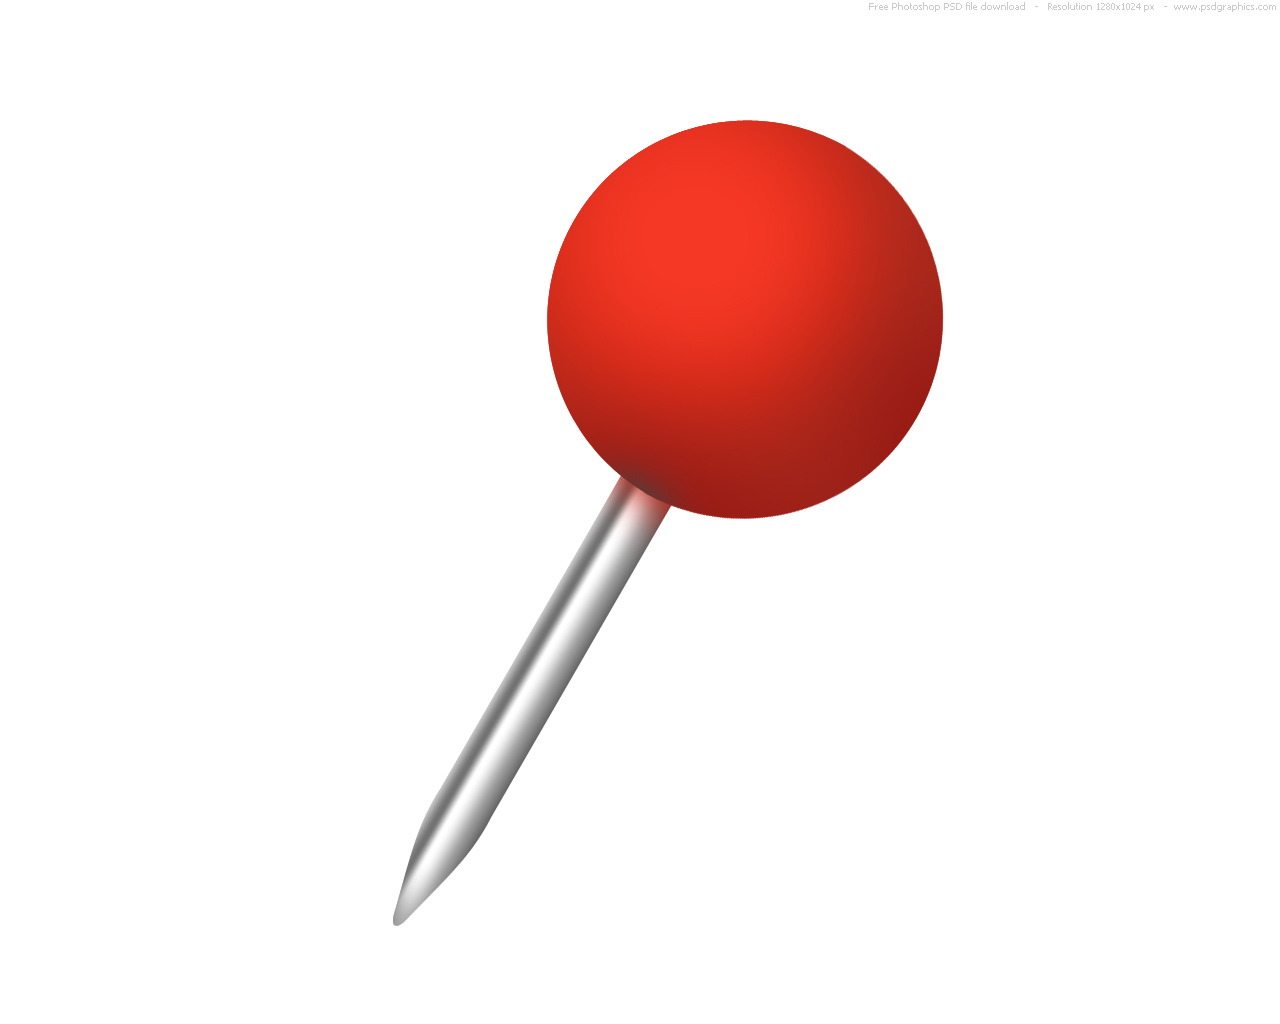 Free Red Push Pin, Download Free Clip Art, Free Clip Art on